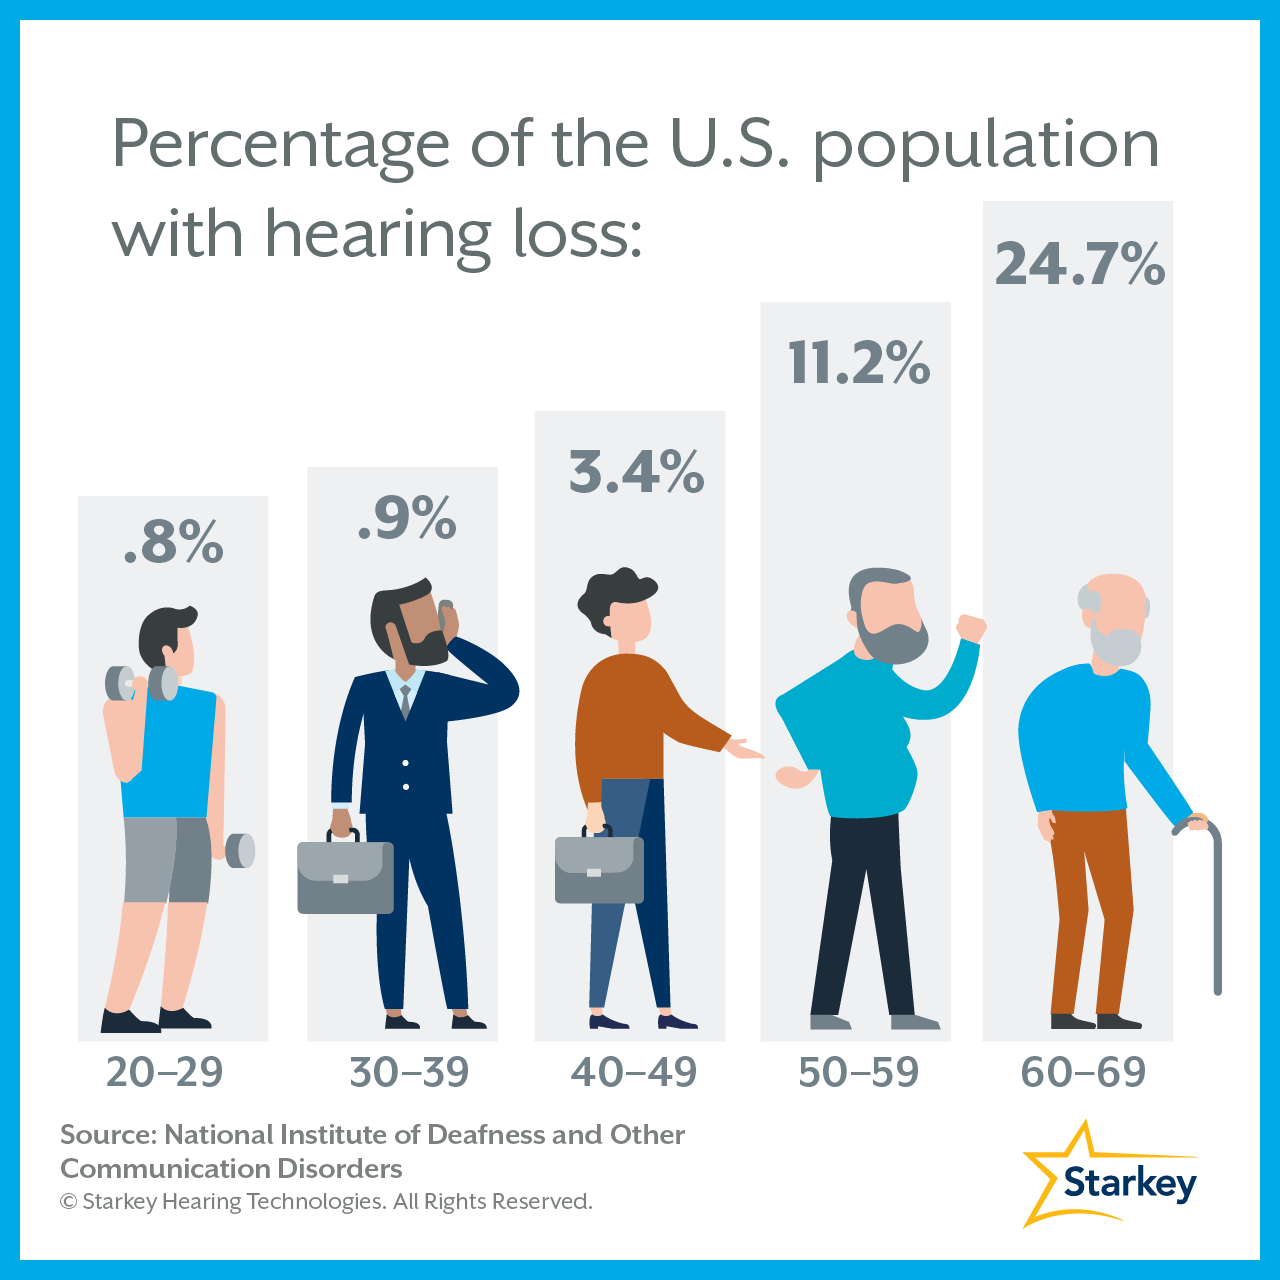 Percentage of U.S. population with hearing loss.